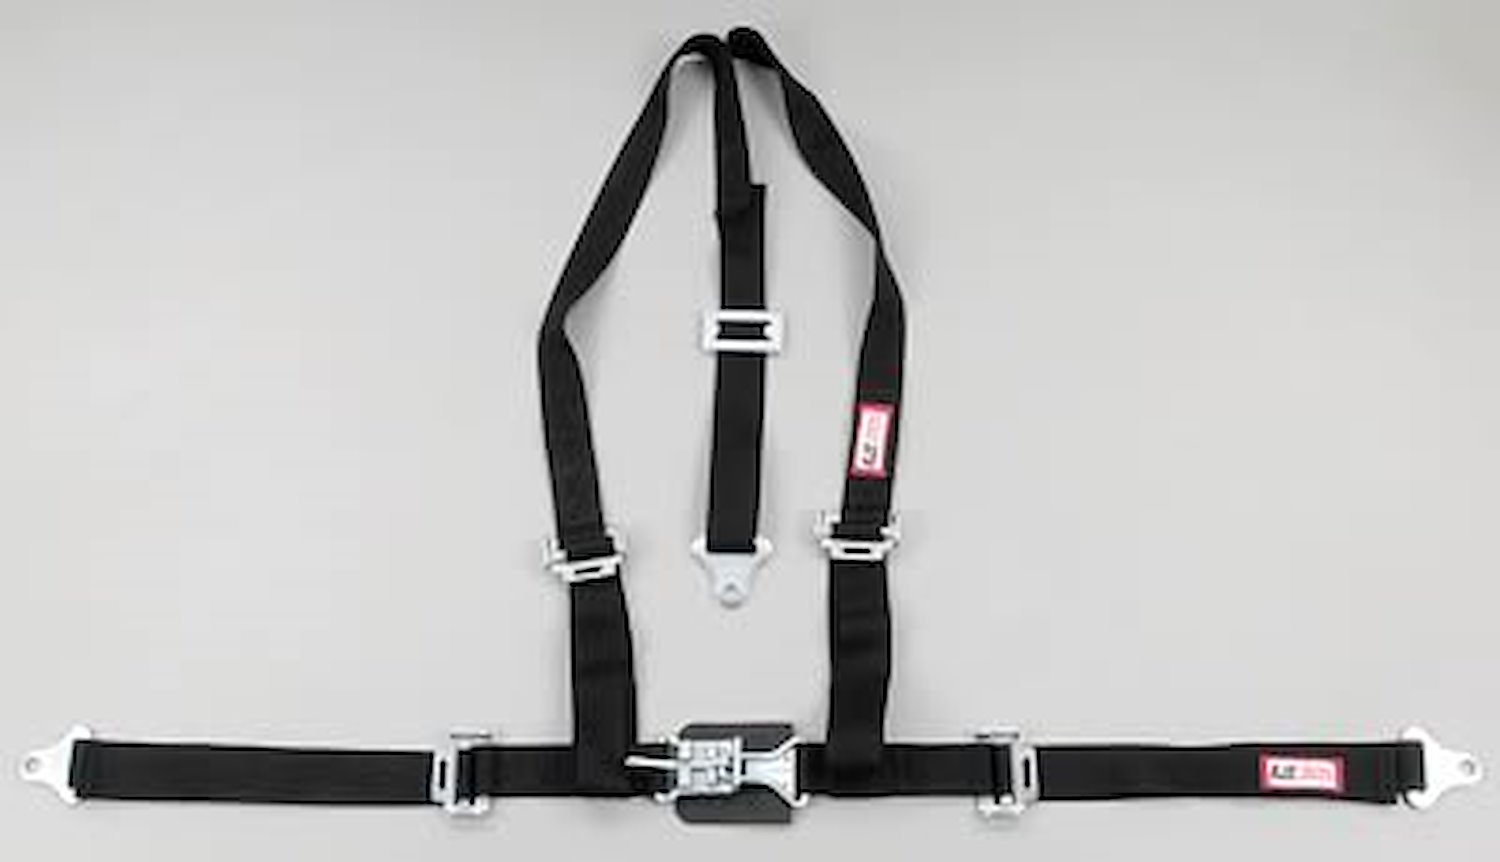 NON-SFI L&L HARNESS 3 PULL UP Lap Belt SEWN IN 2 S.H. Individual FLOOR Mount ALL WRAP ENDS YELLOW